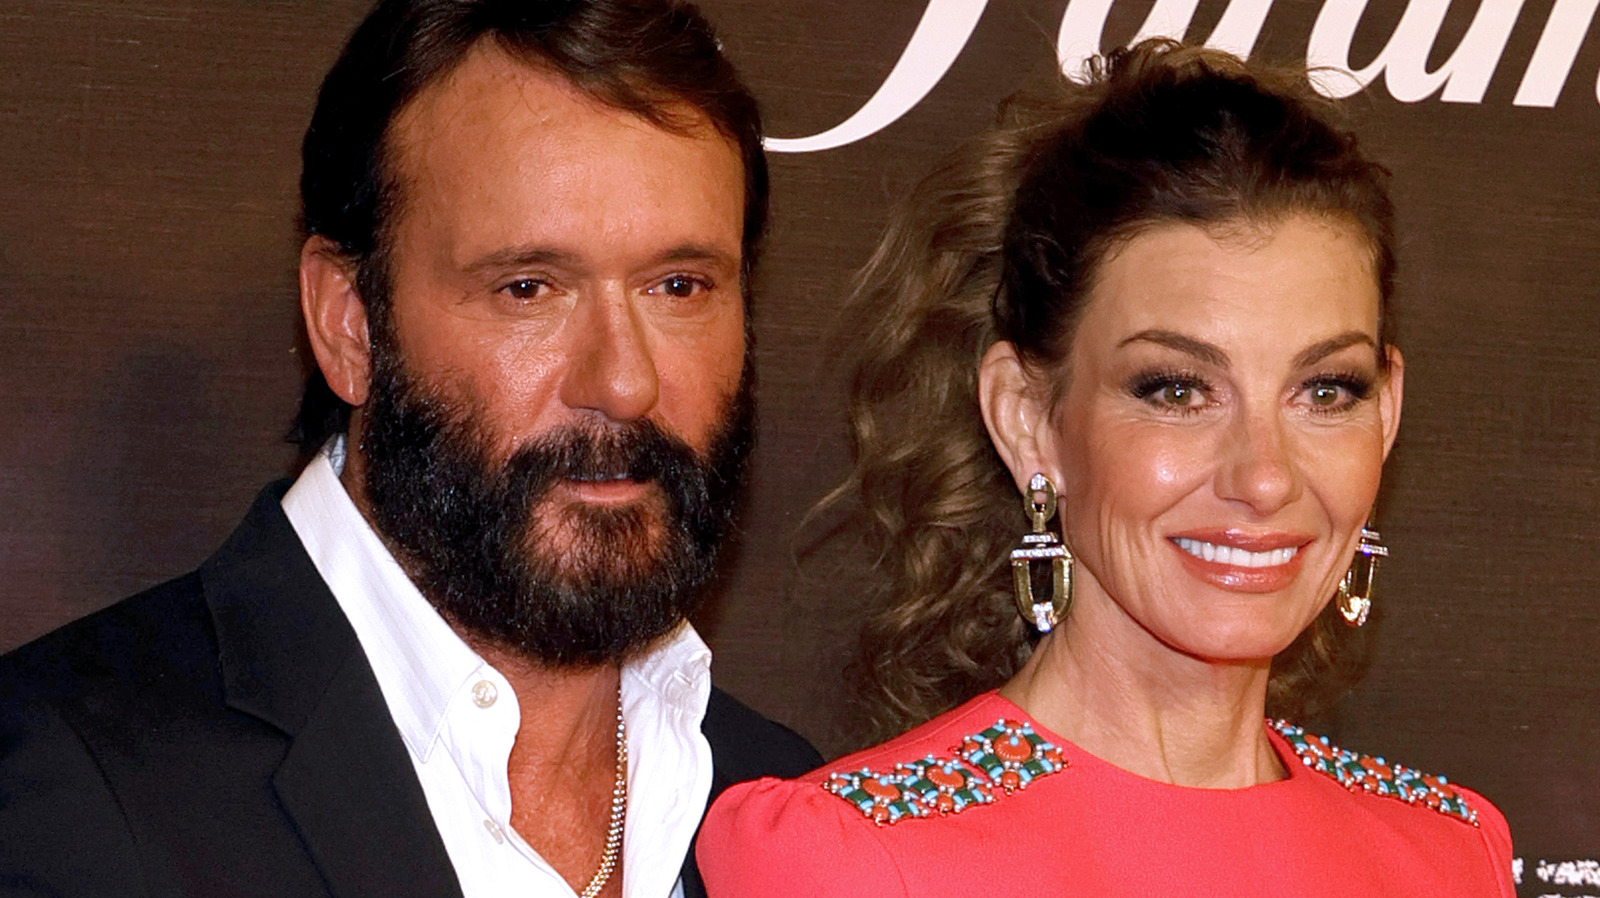 Faith Hill Reveals Why 1883 Was The First Project She And Tim McGraw